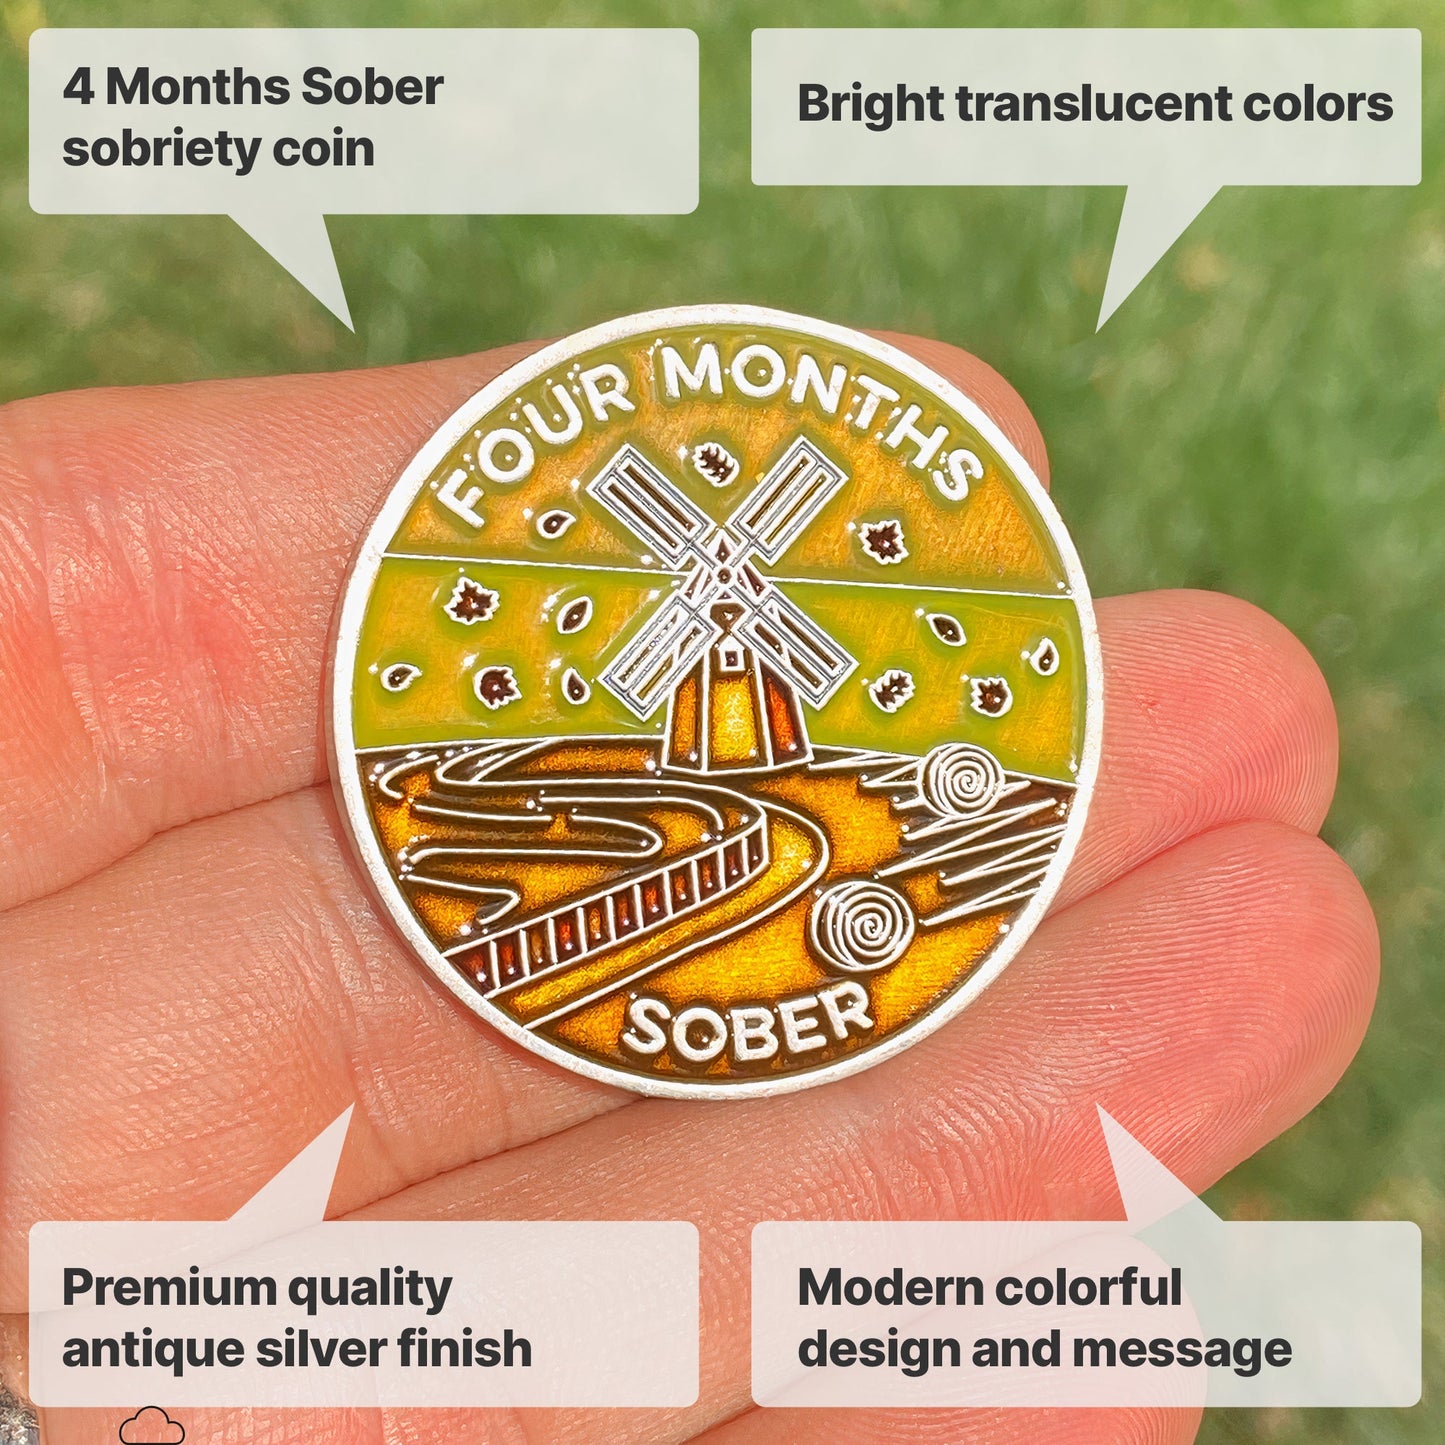 Four Months Sober sobriety coin - The Achieve Mint